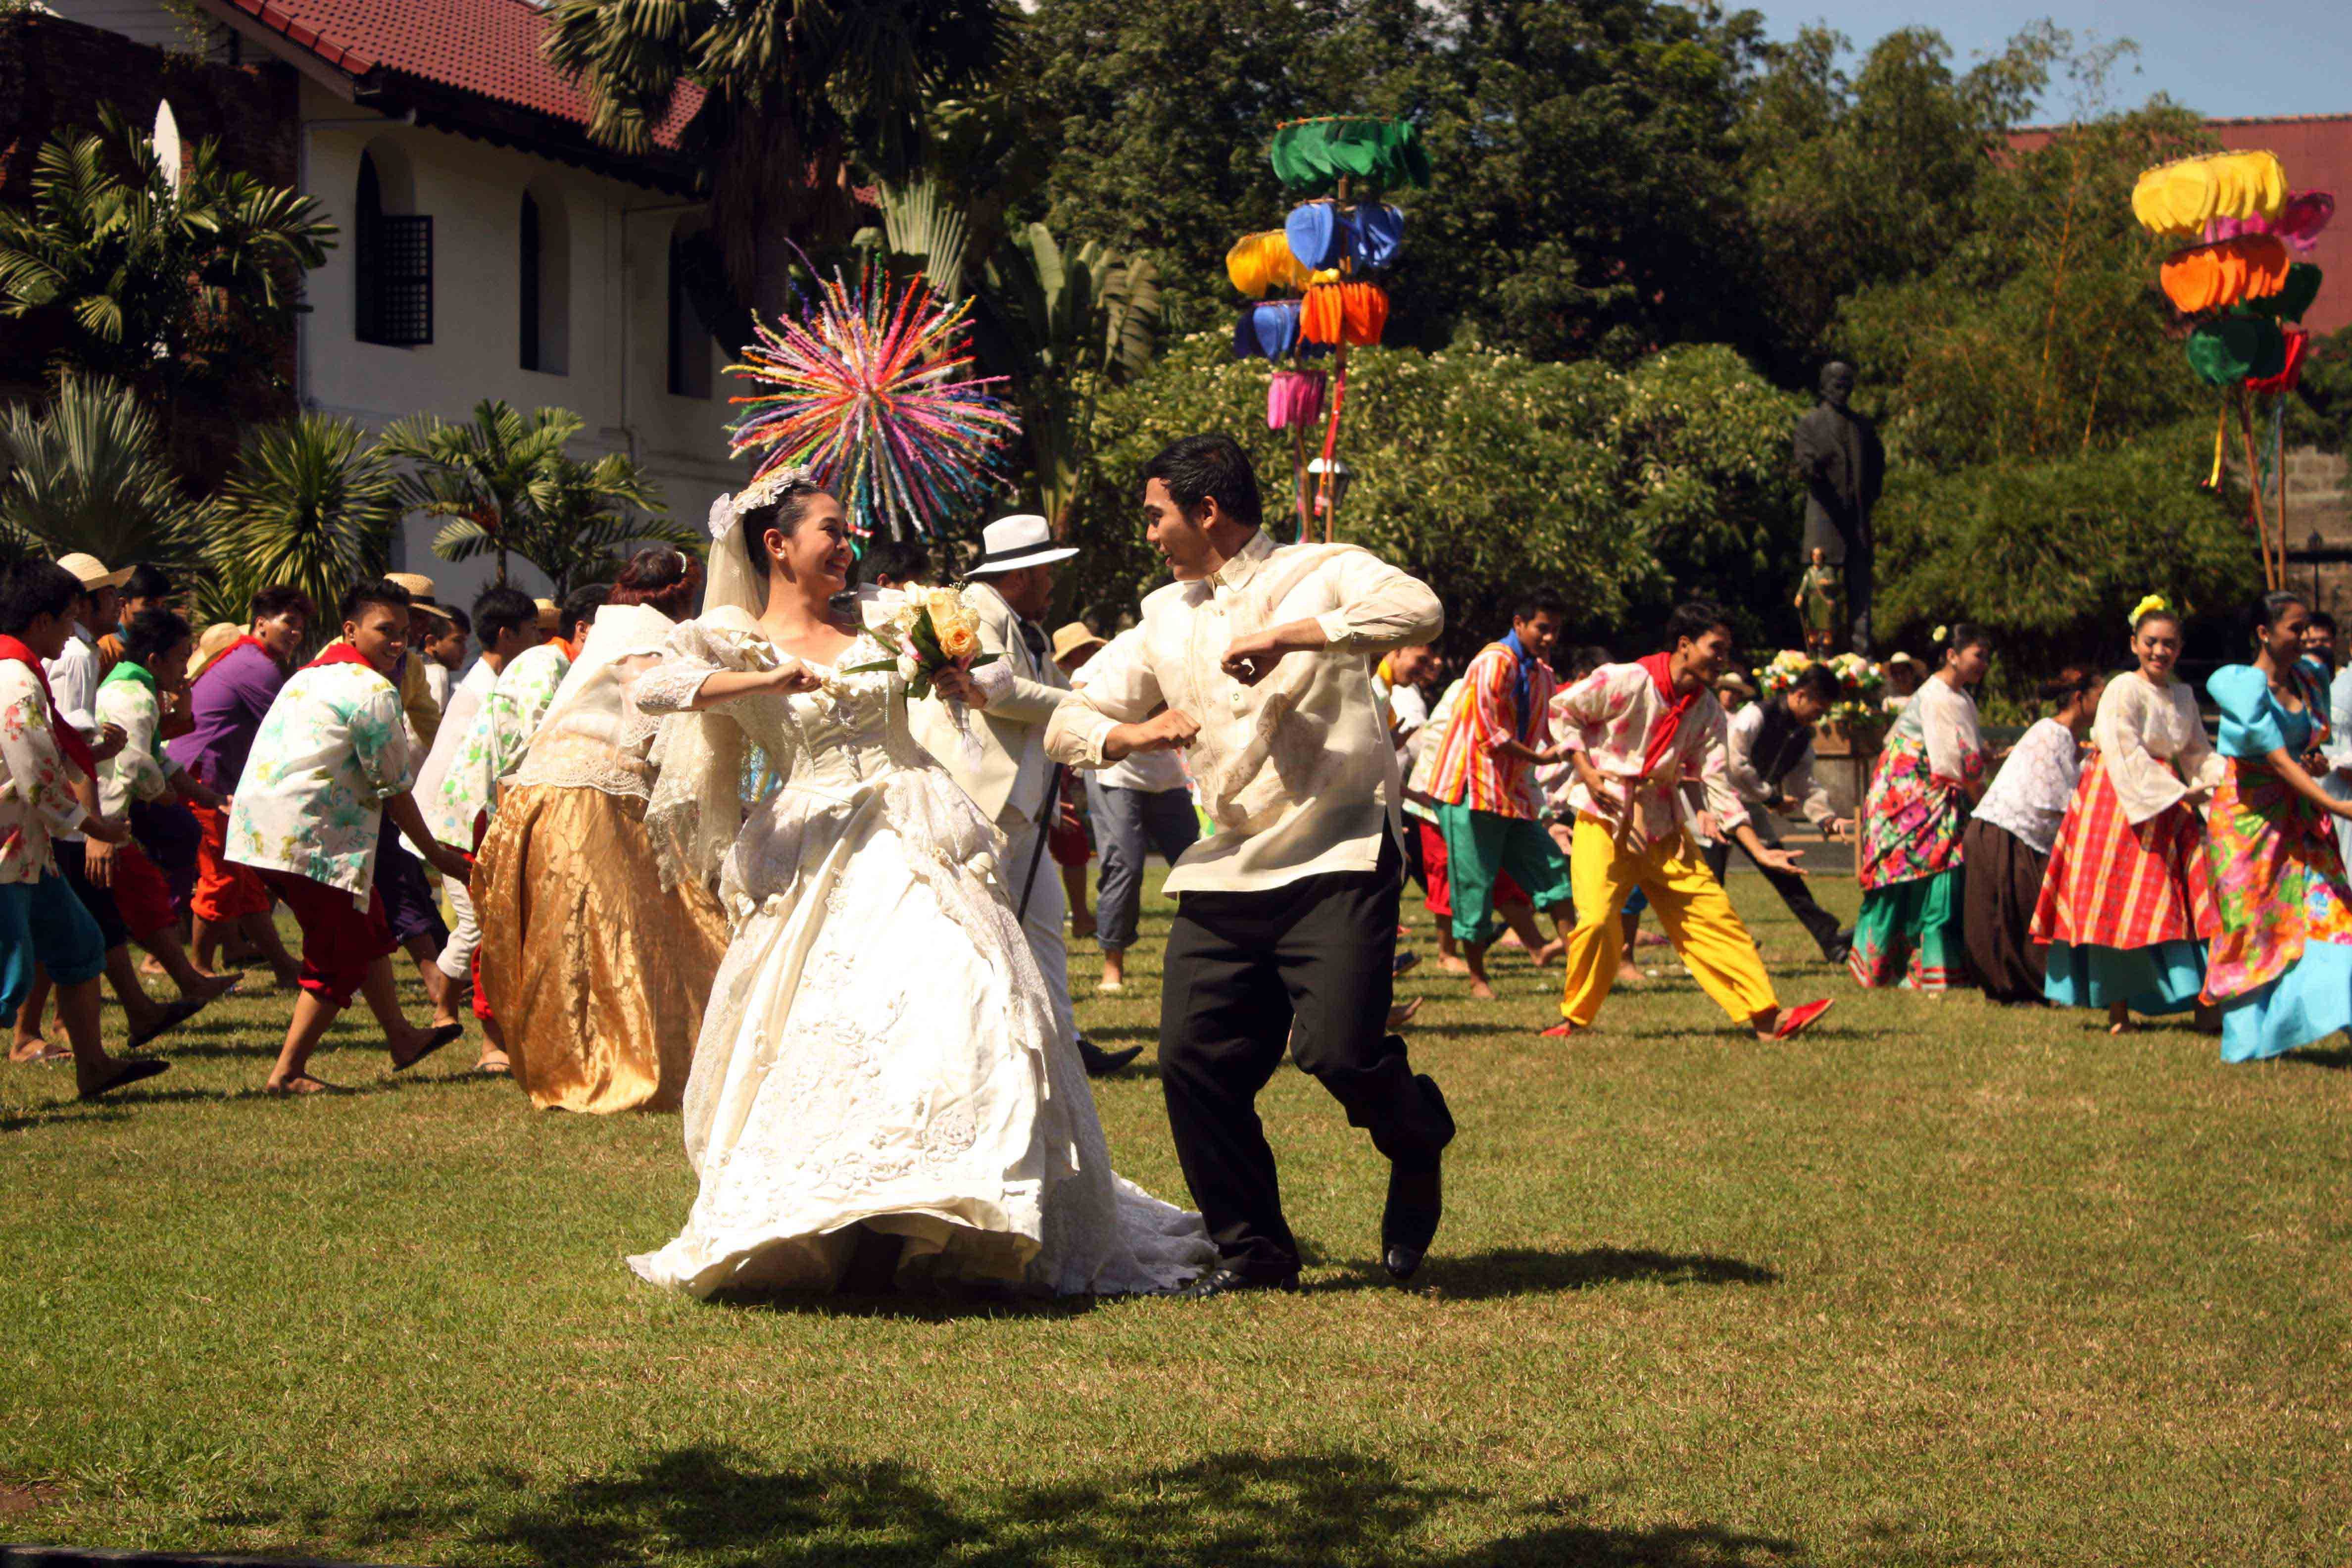 TRADITIONAL WEDDINGS. About 200 performers dance in front of the spouses in a showcase of the vibrant traditional weddings in the Philippines.